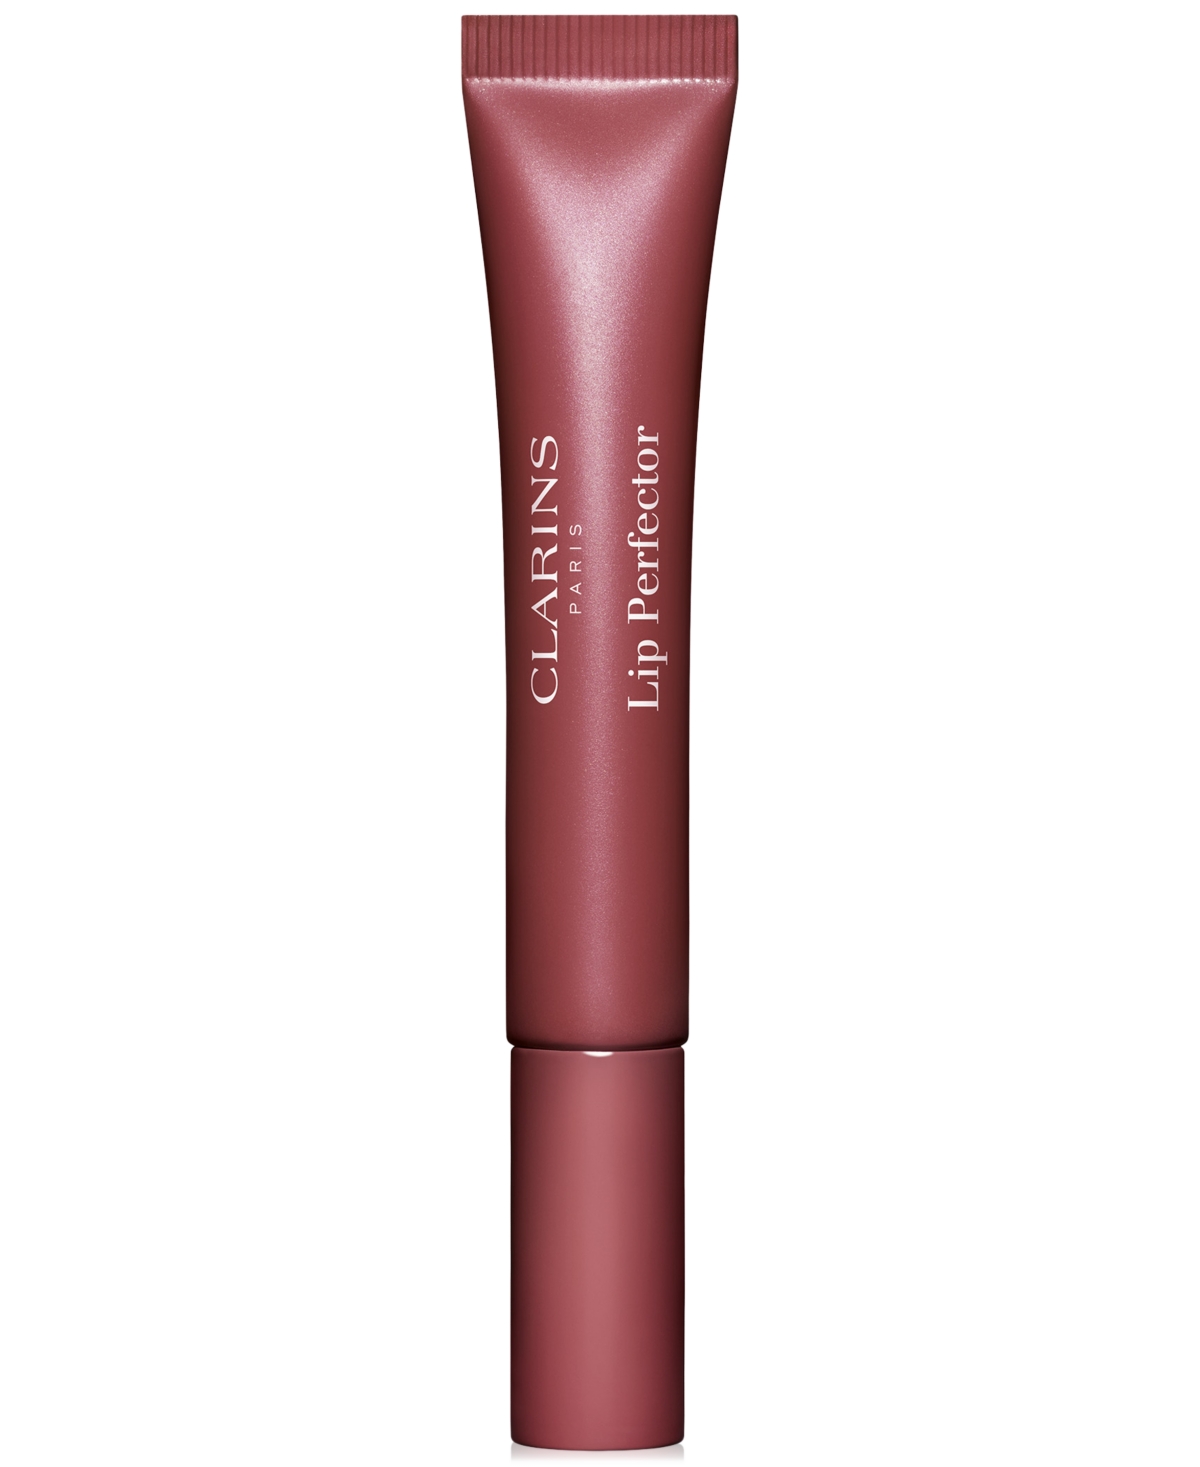 Clarins Lip Perfector 2-in-1 Lip & Cheek Color Balm 0.35 Oz. In 25 Mulberry Glow